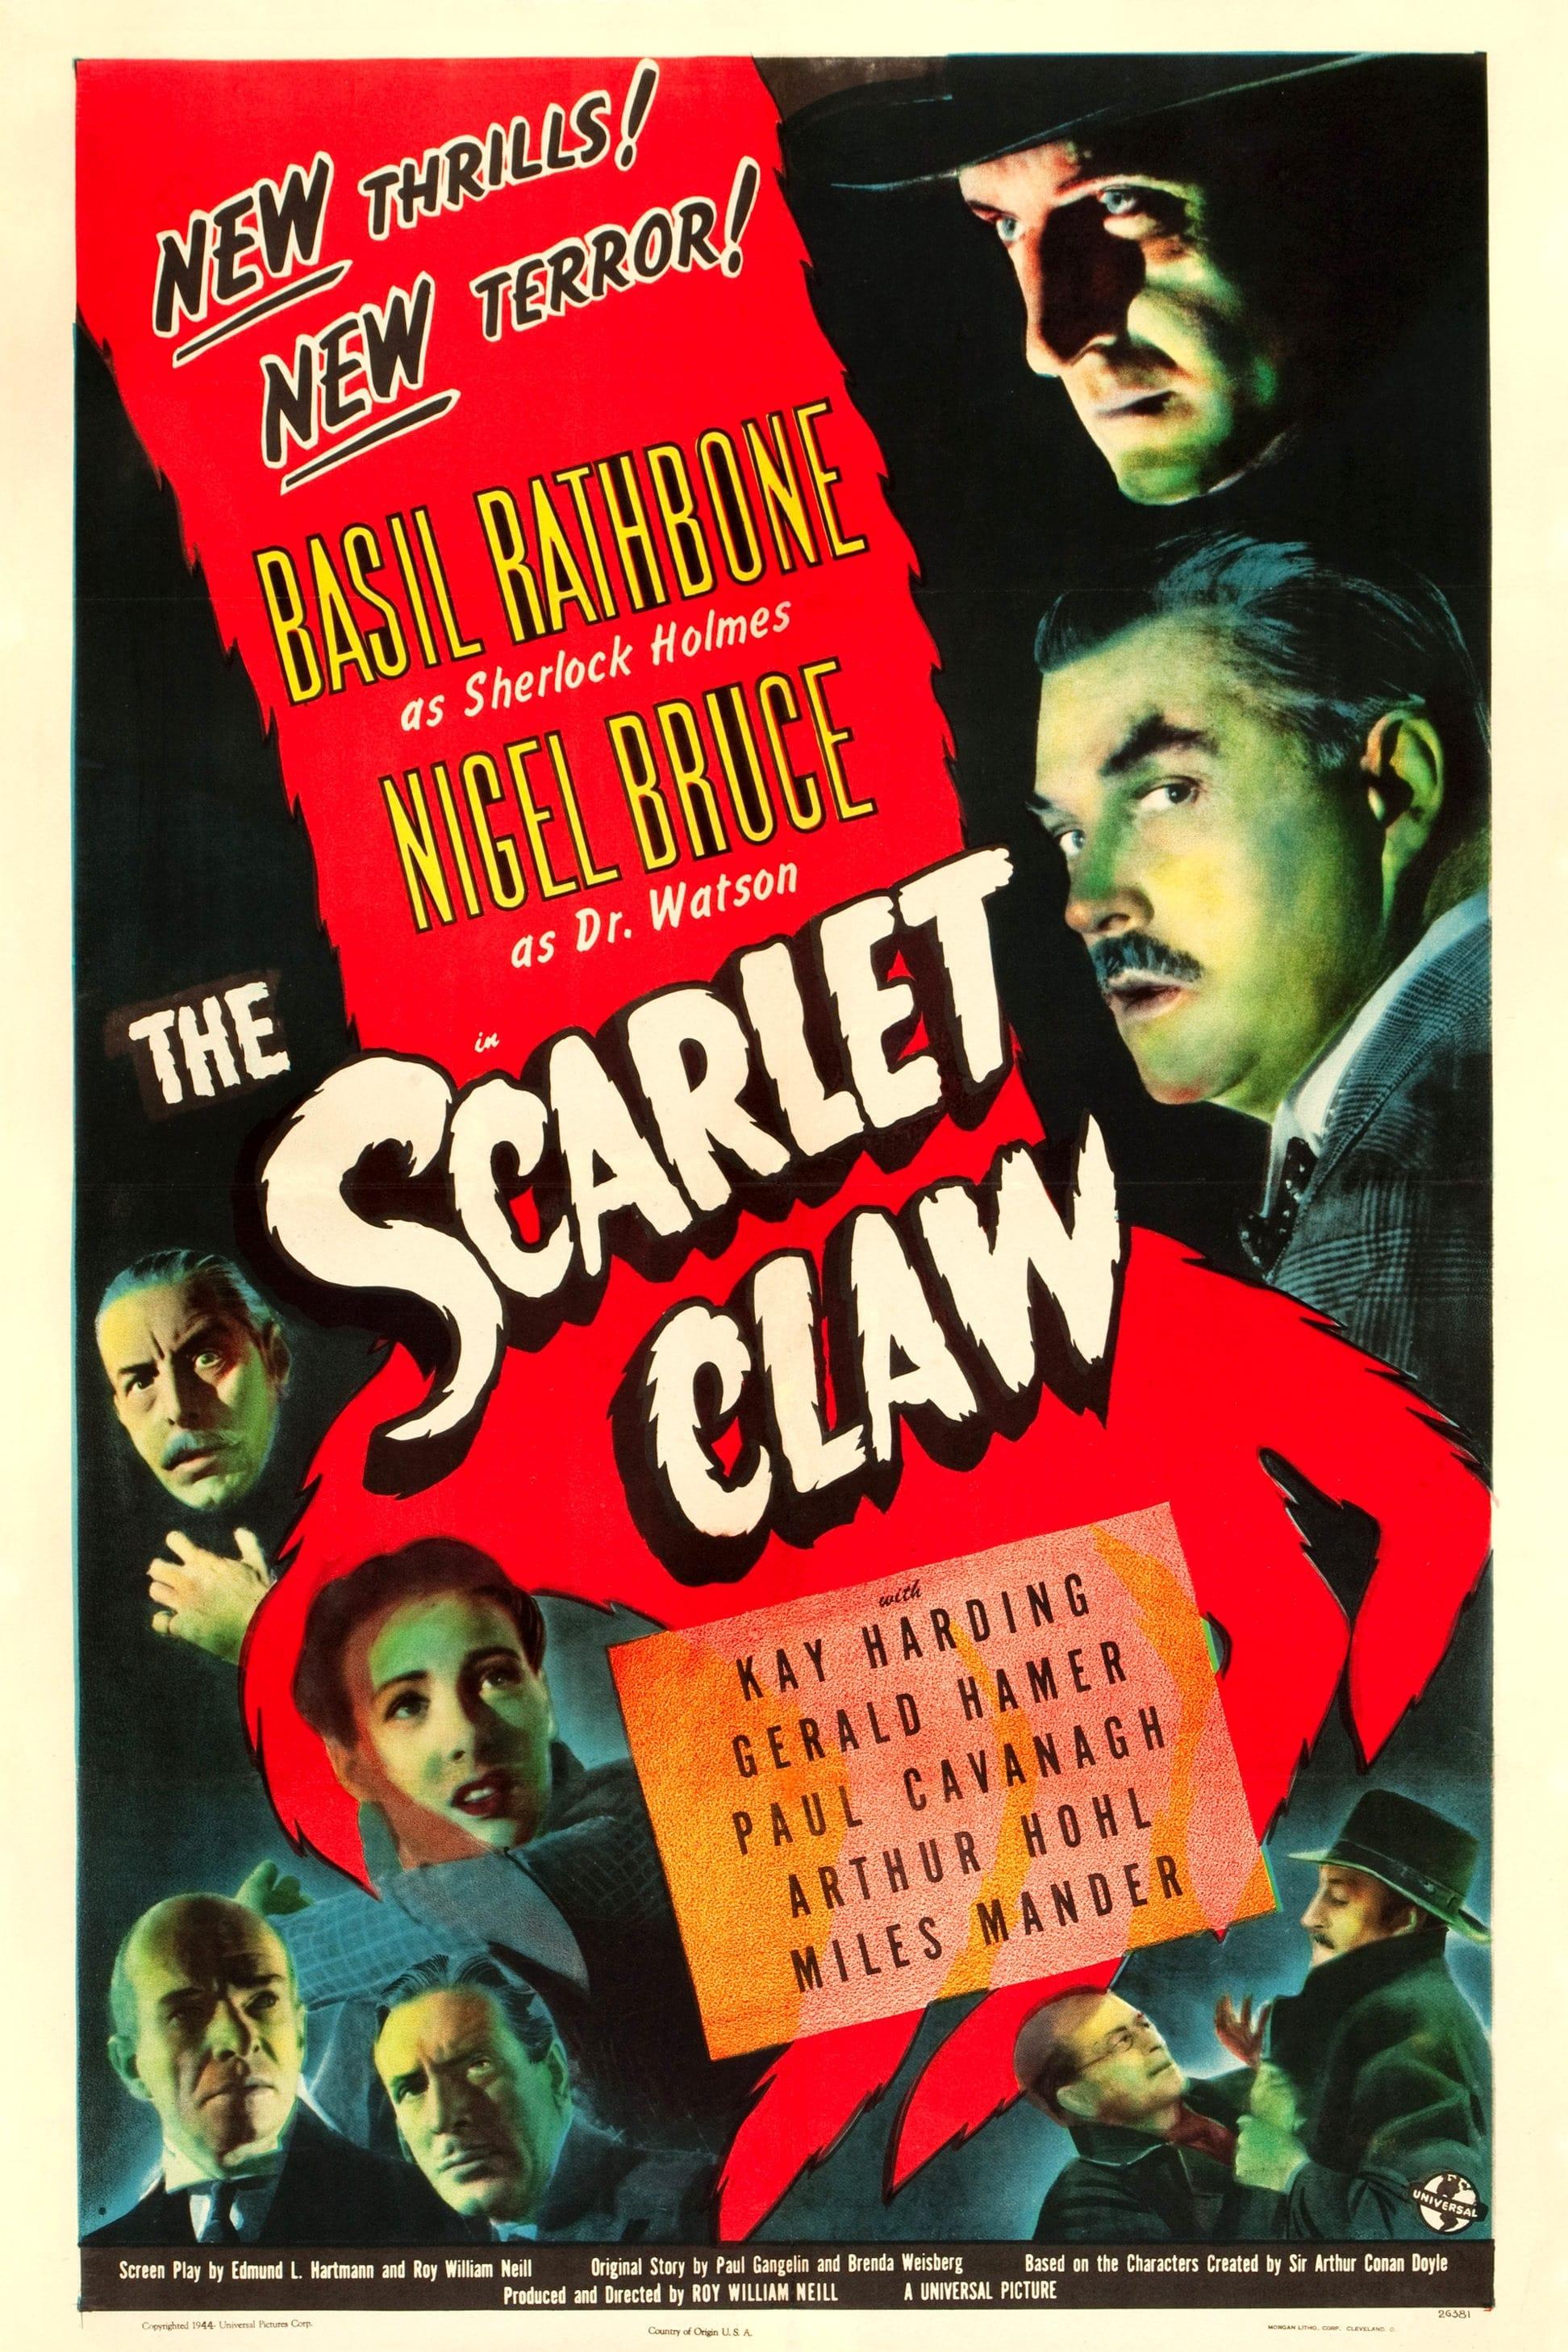 The Scarlet Claw poster